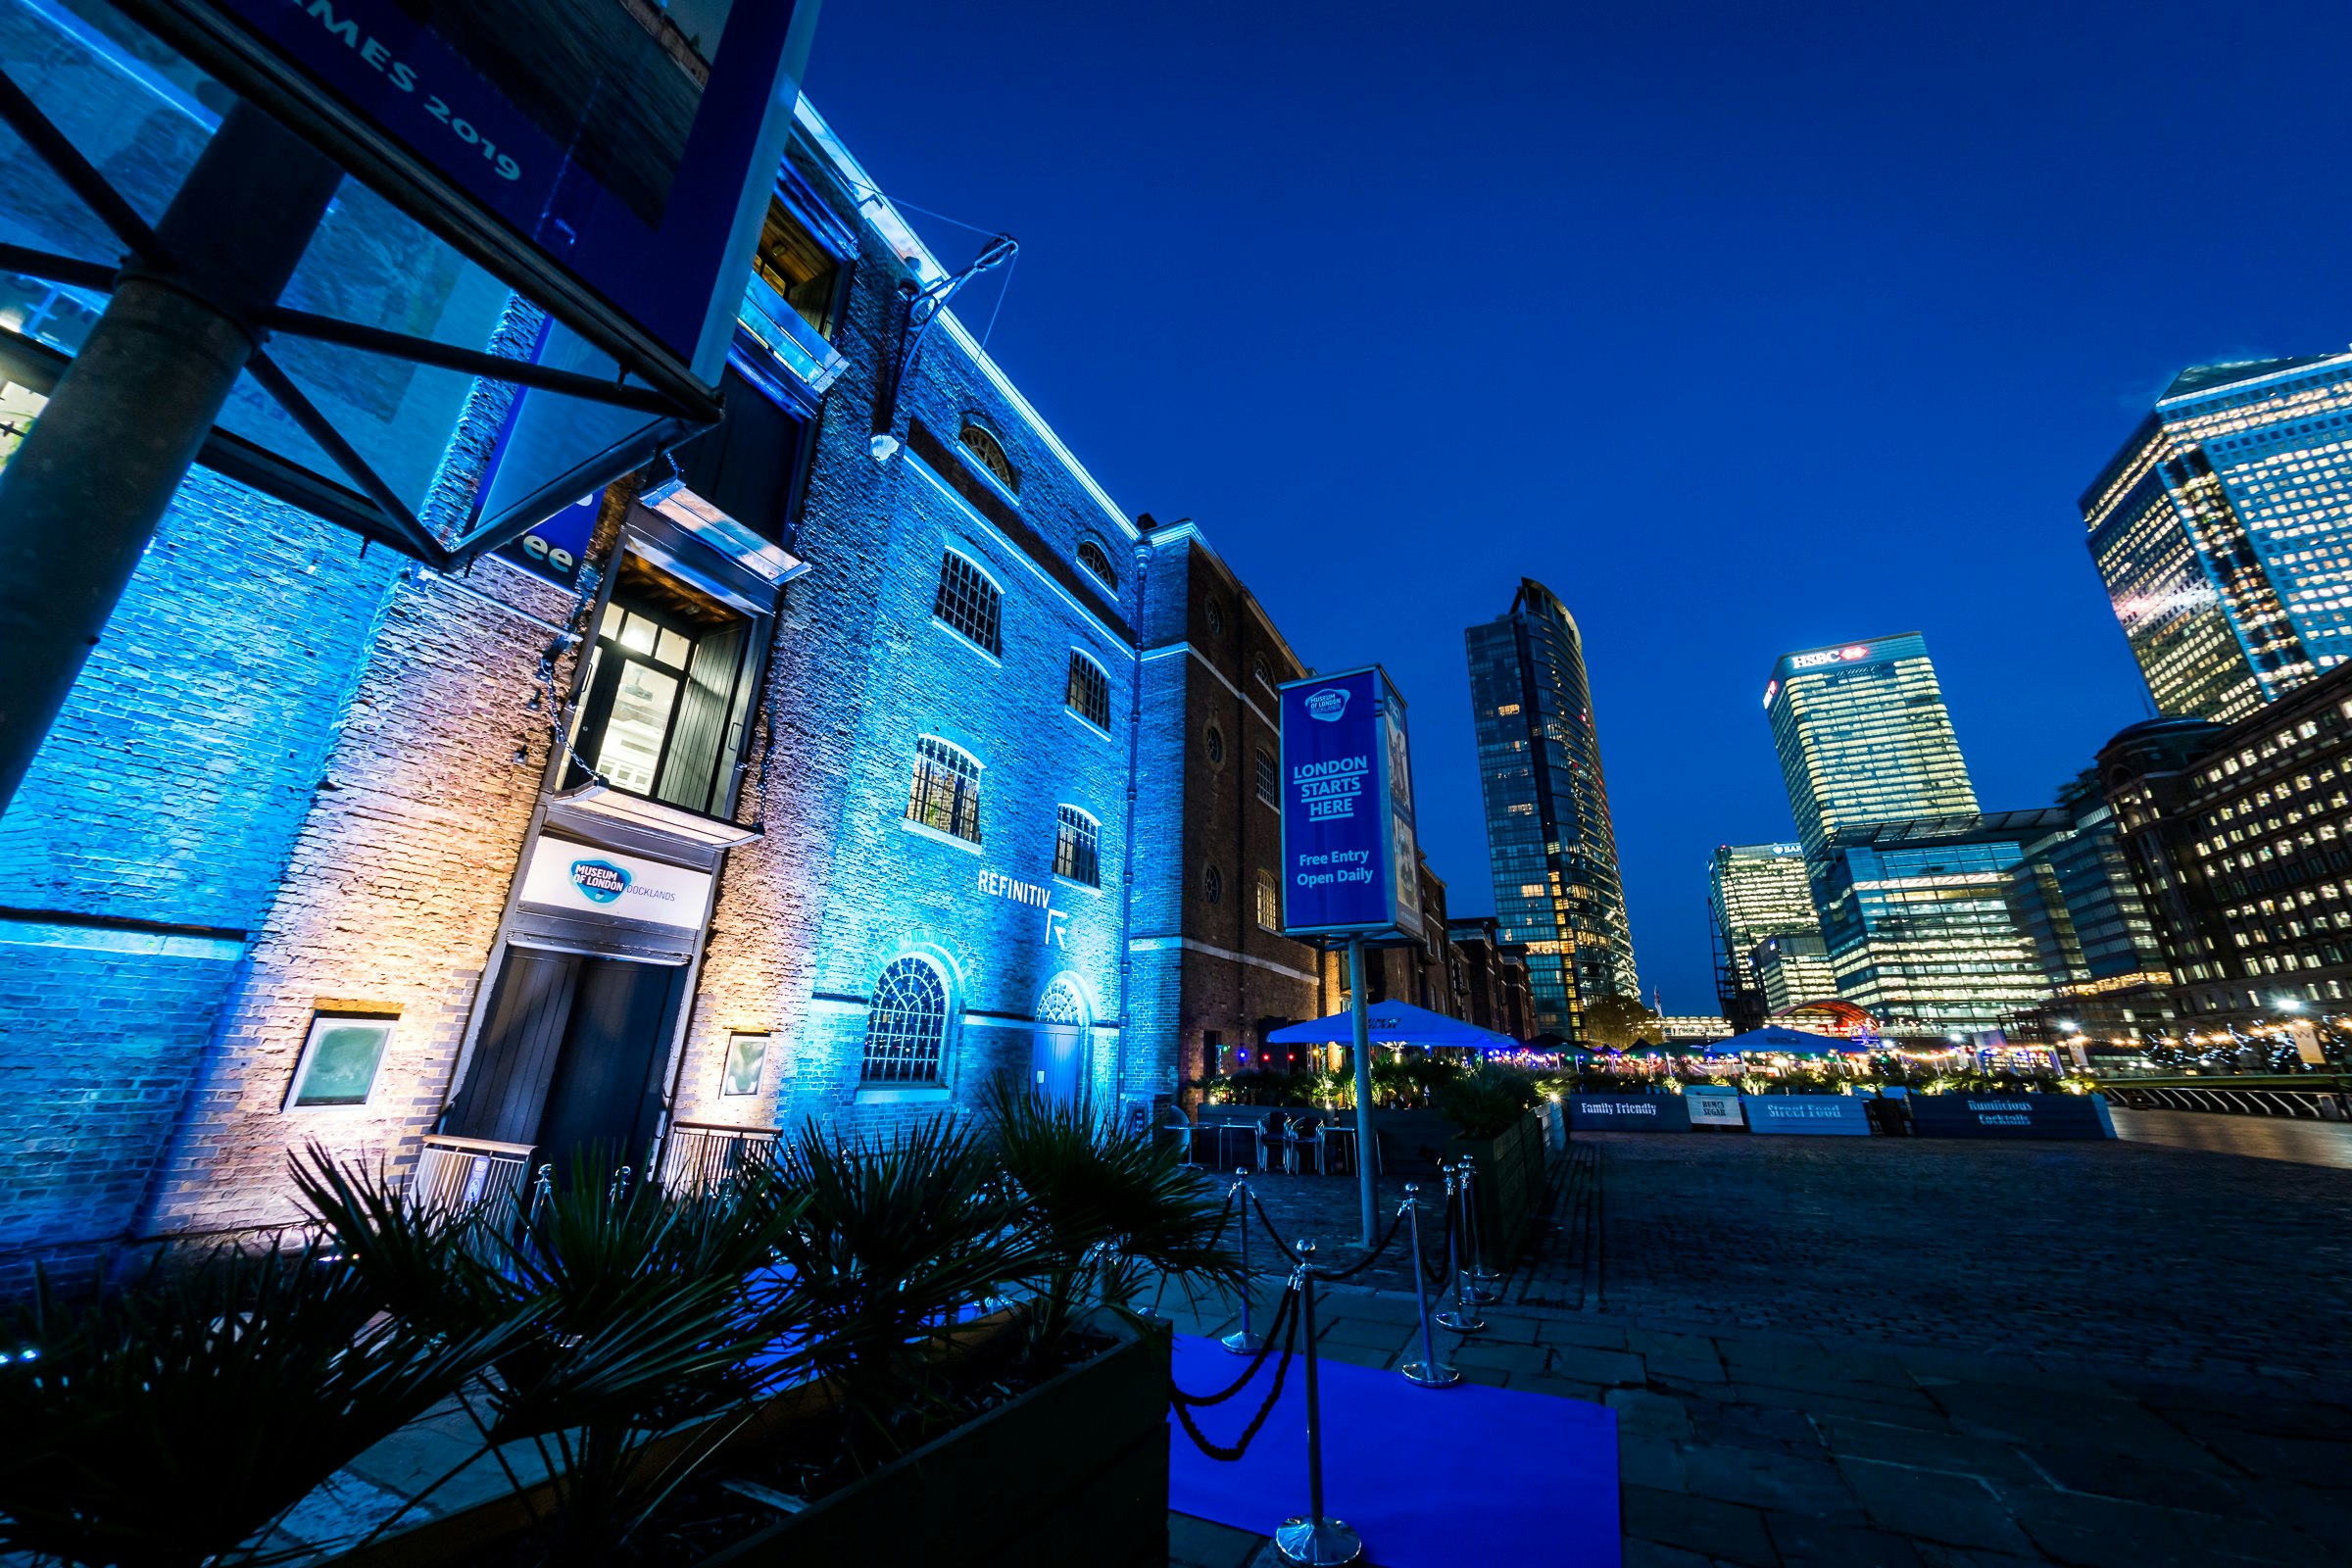 Outdoor Birthday Party Venues in London - Museum of London Docklands